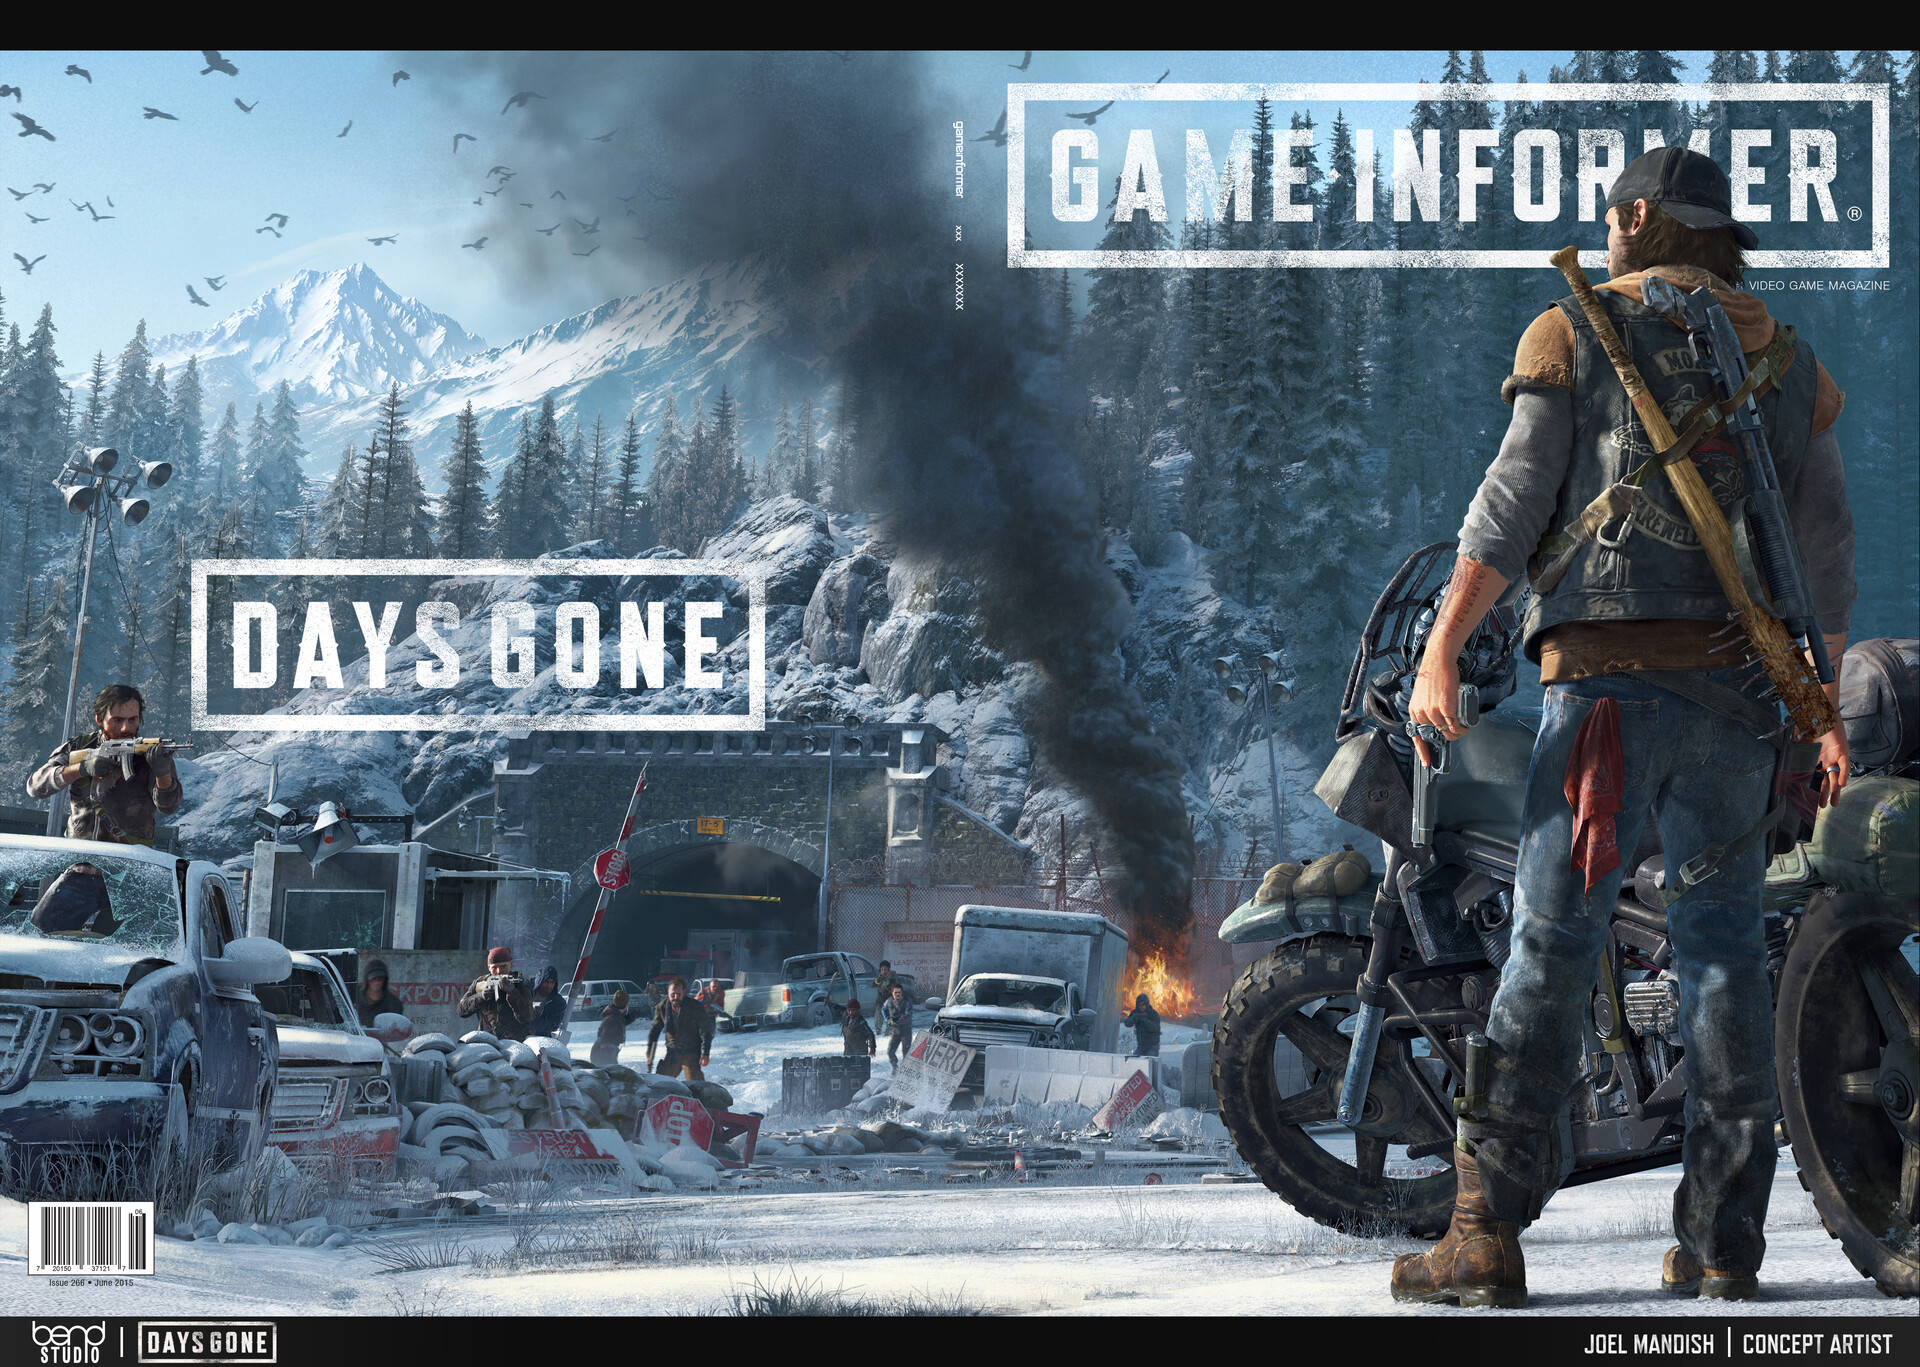 DAYS GONE SPECIAL EDITION COVER on Behance